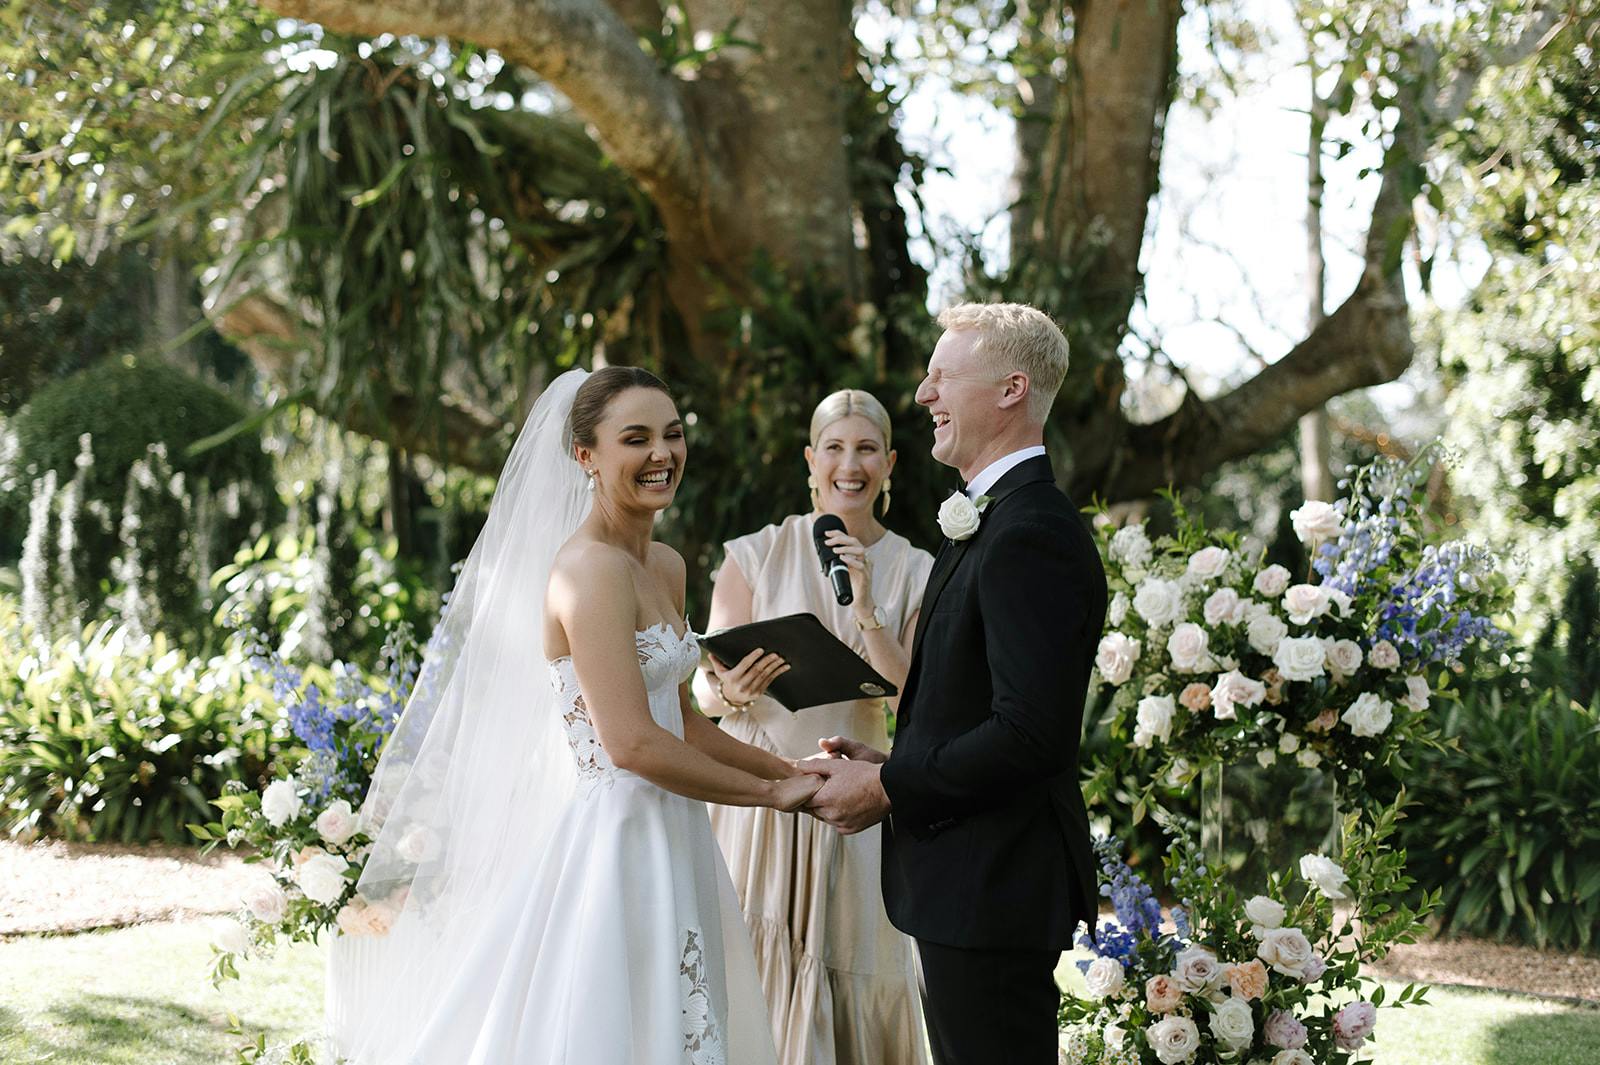 A bride and groom, holding hands and smiling at each other, stand facing an officiant during their wedding ceremony outdoors. The bride is in a white gown with a veil, and the groom is in a black suit. The background is lush with greenery and floral arrangements.